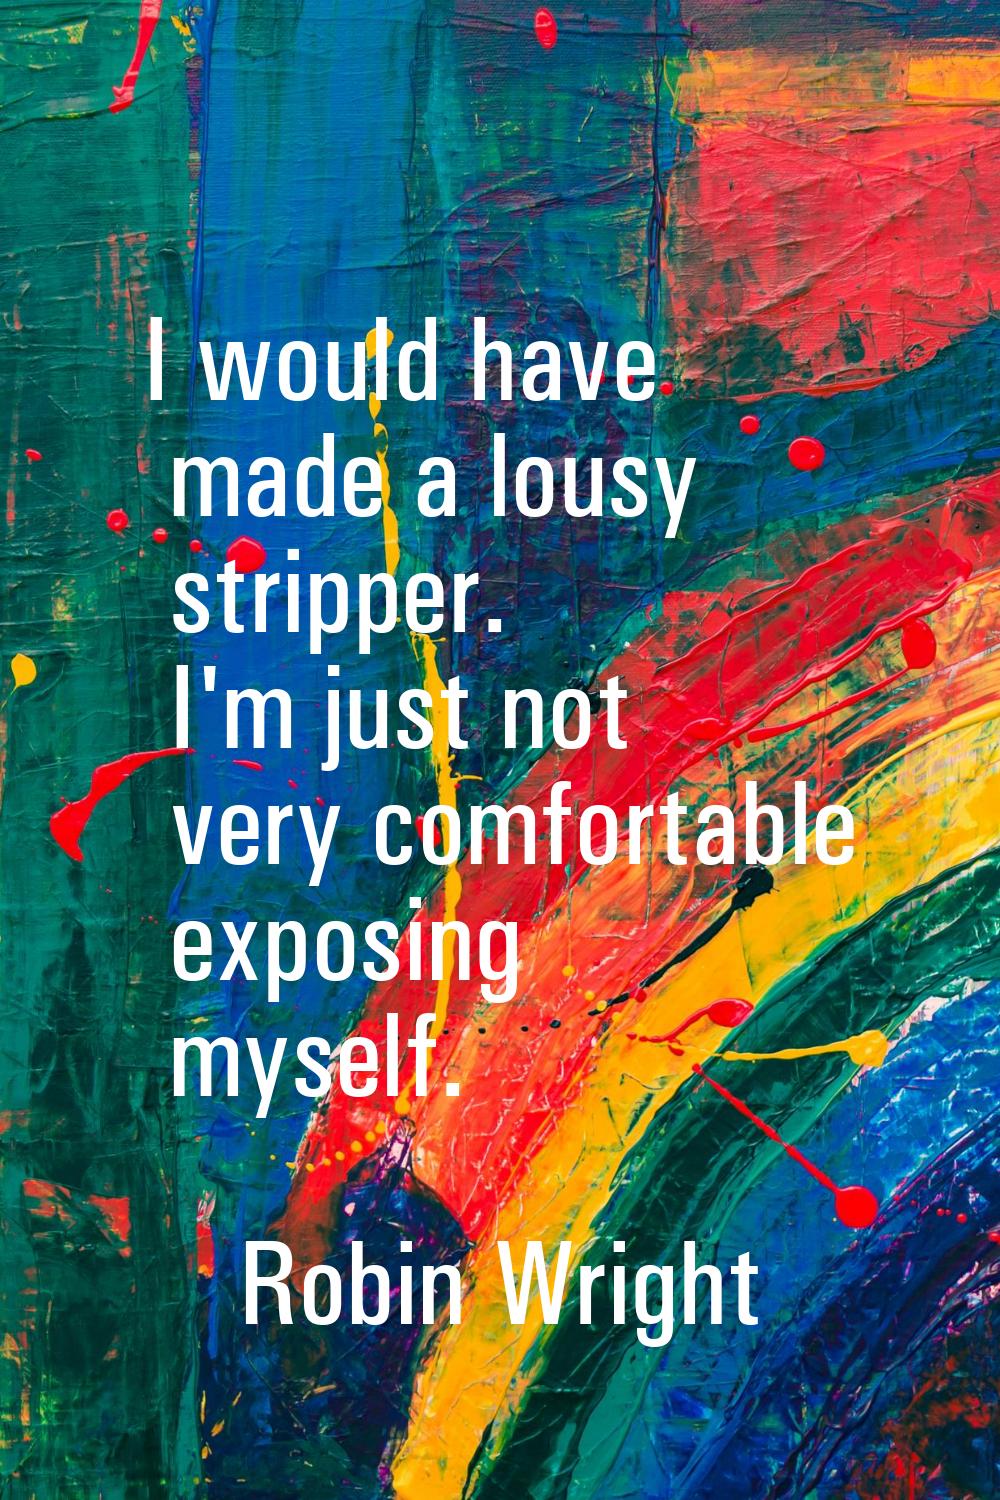 I would have made a lousy stripper. I'm just not very comfortable exposing myself.